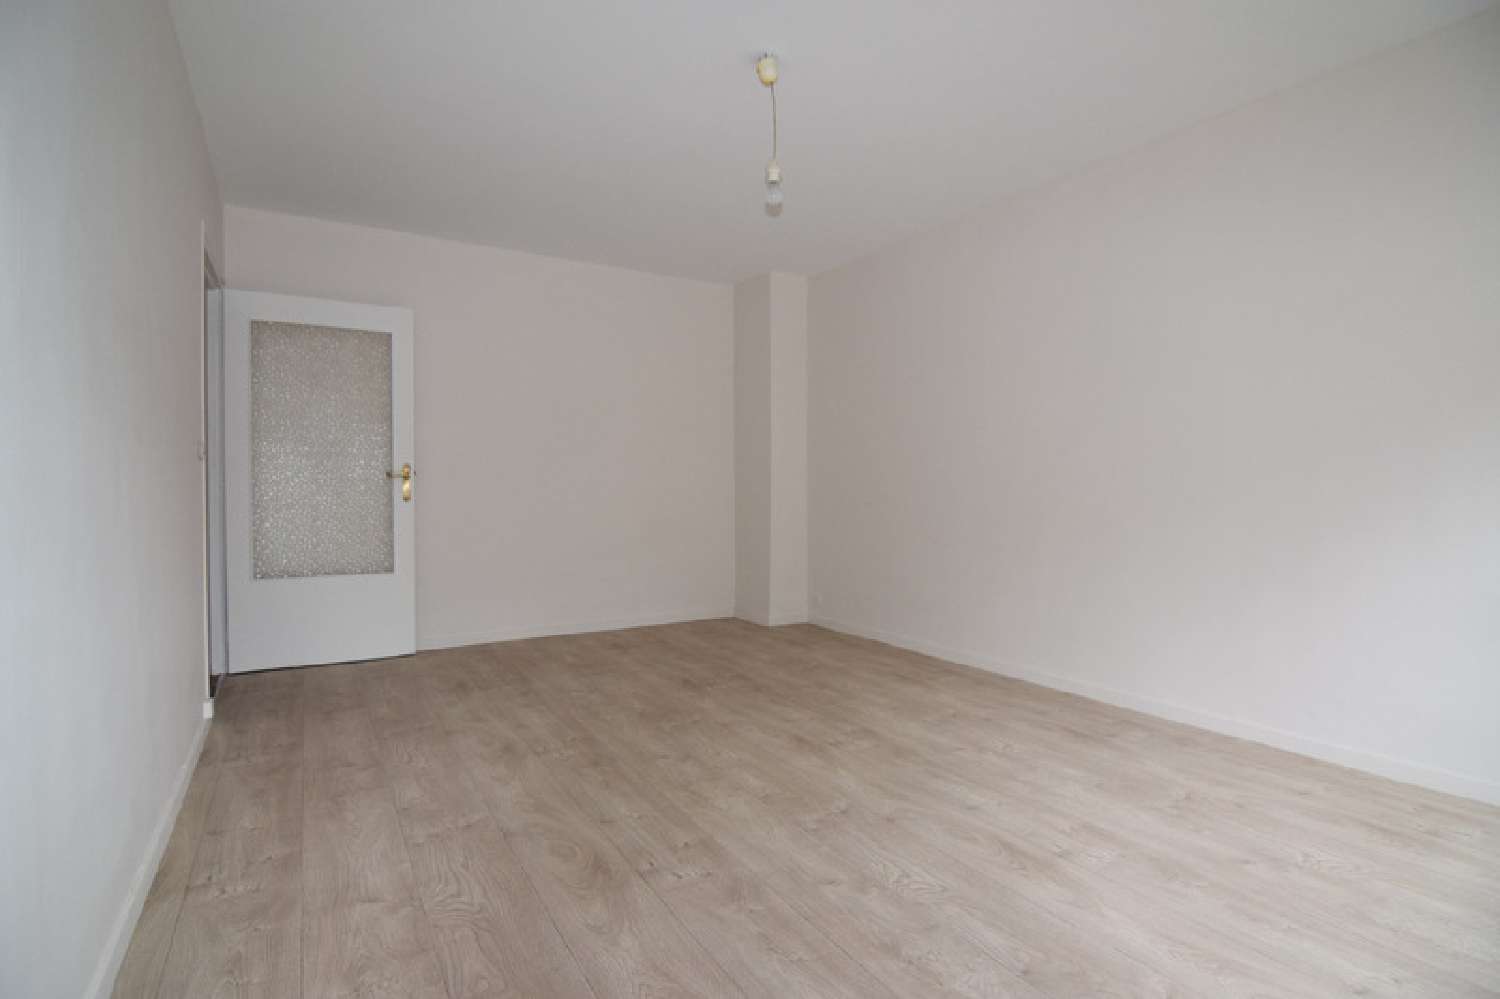  à vendre appartement Fâches-Thumesnil Nord 2